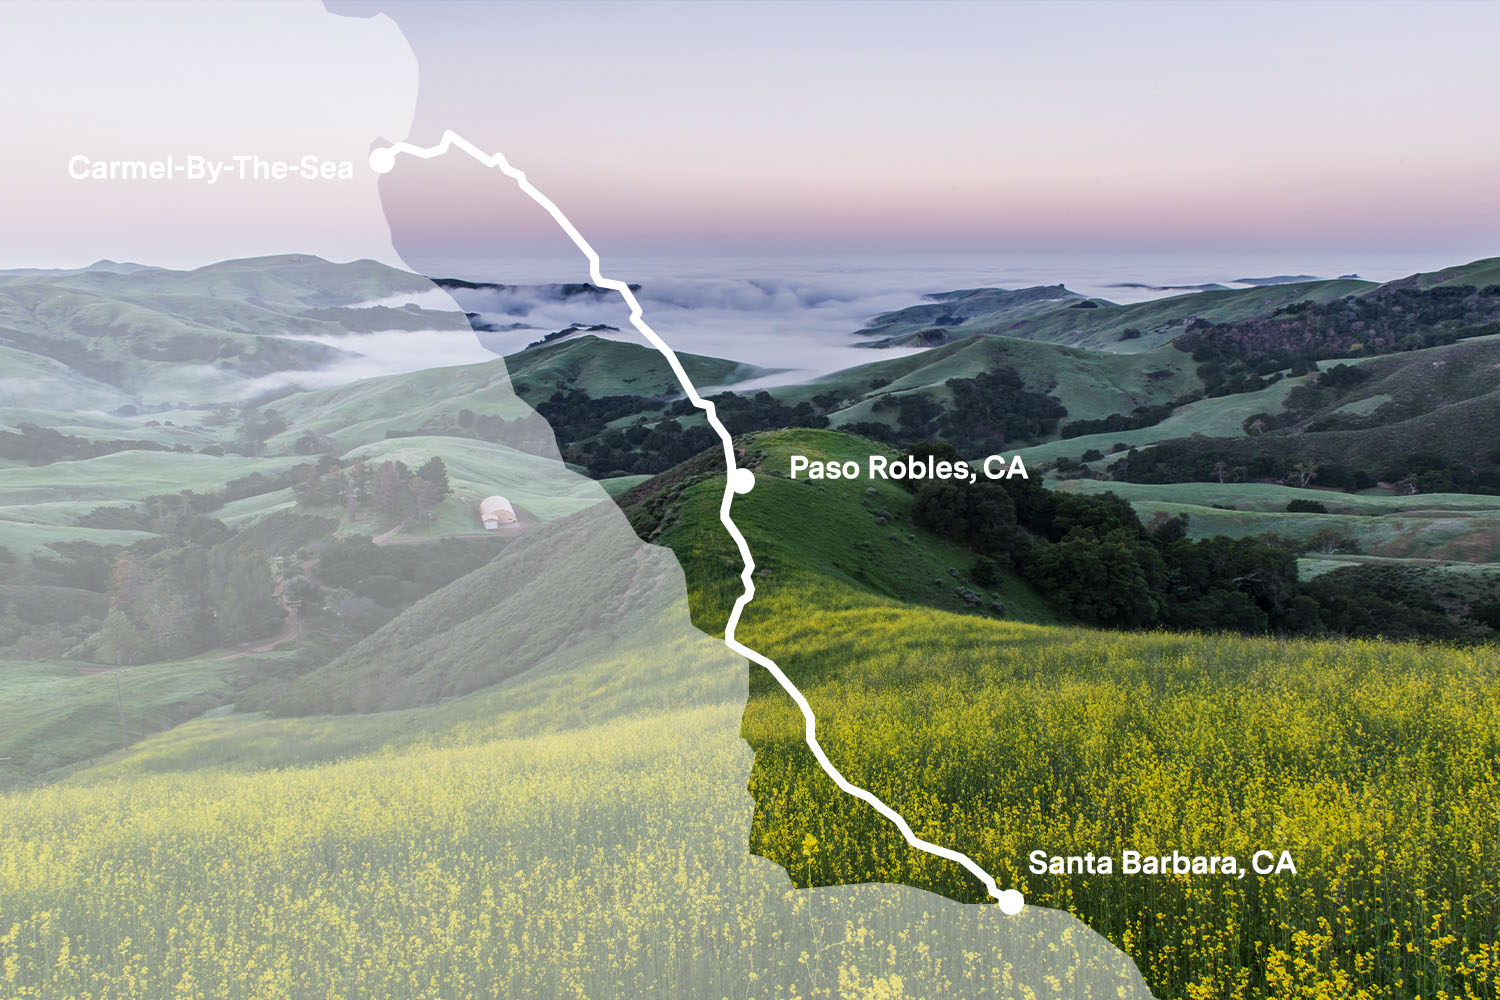 The Best Scenic Drive in Central California is US 101 in CA from Paso Robles to Carmel